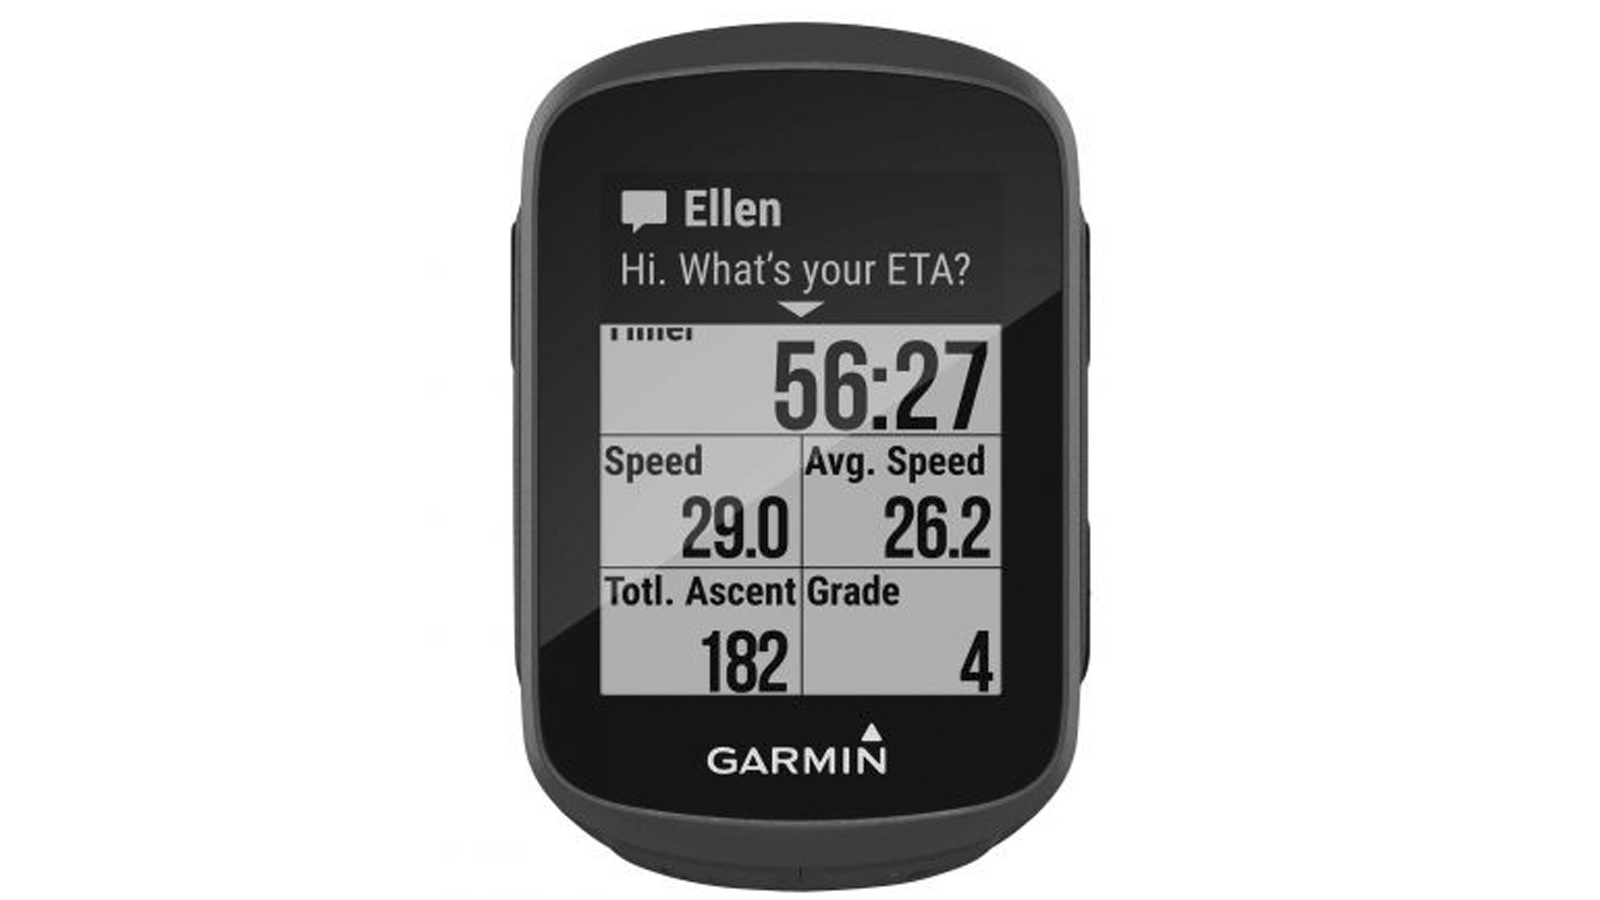 A Garmin Edge 130 on a blank white background. On the display, a message notification shows a text message